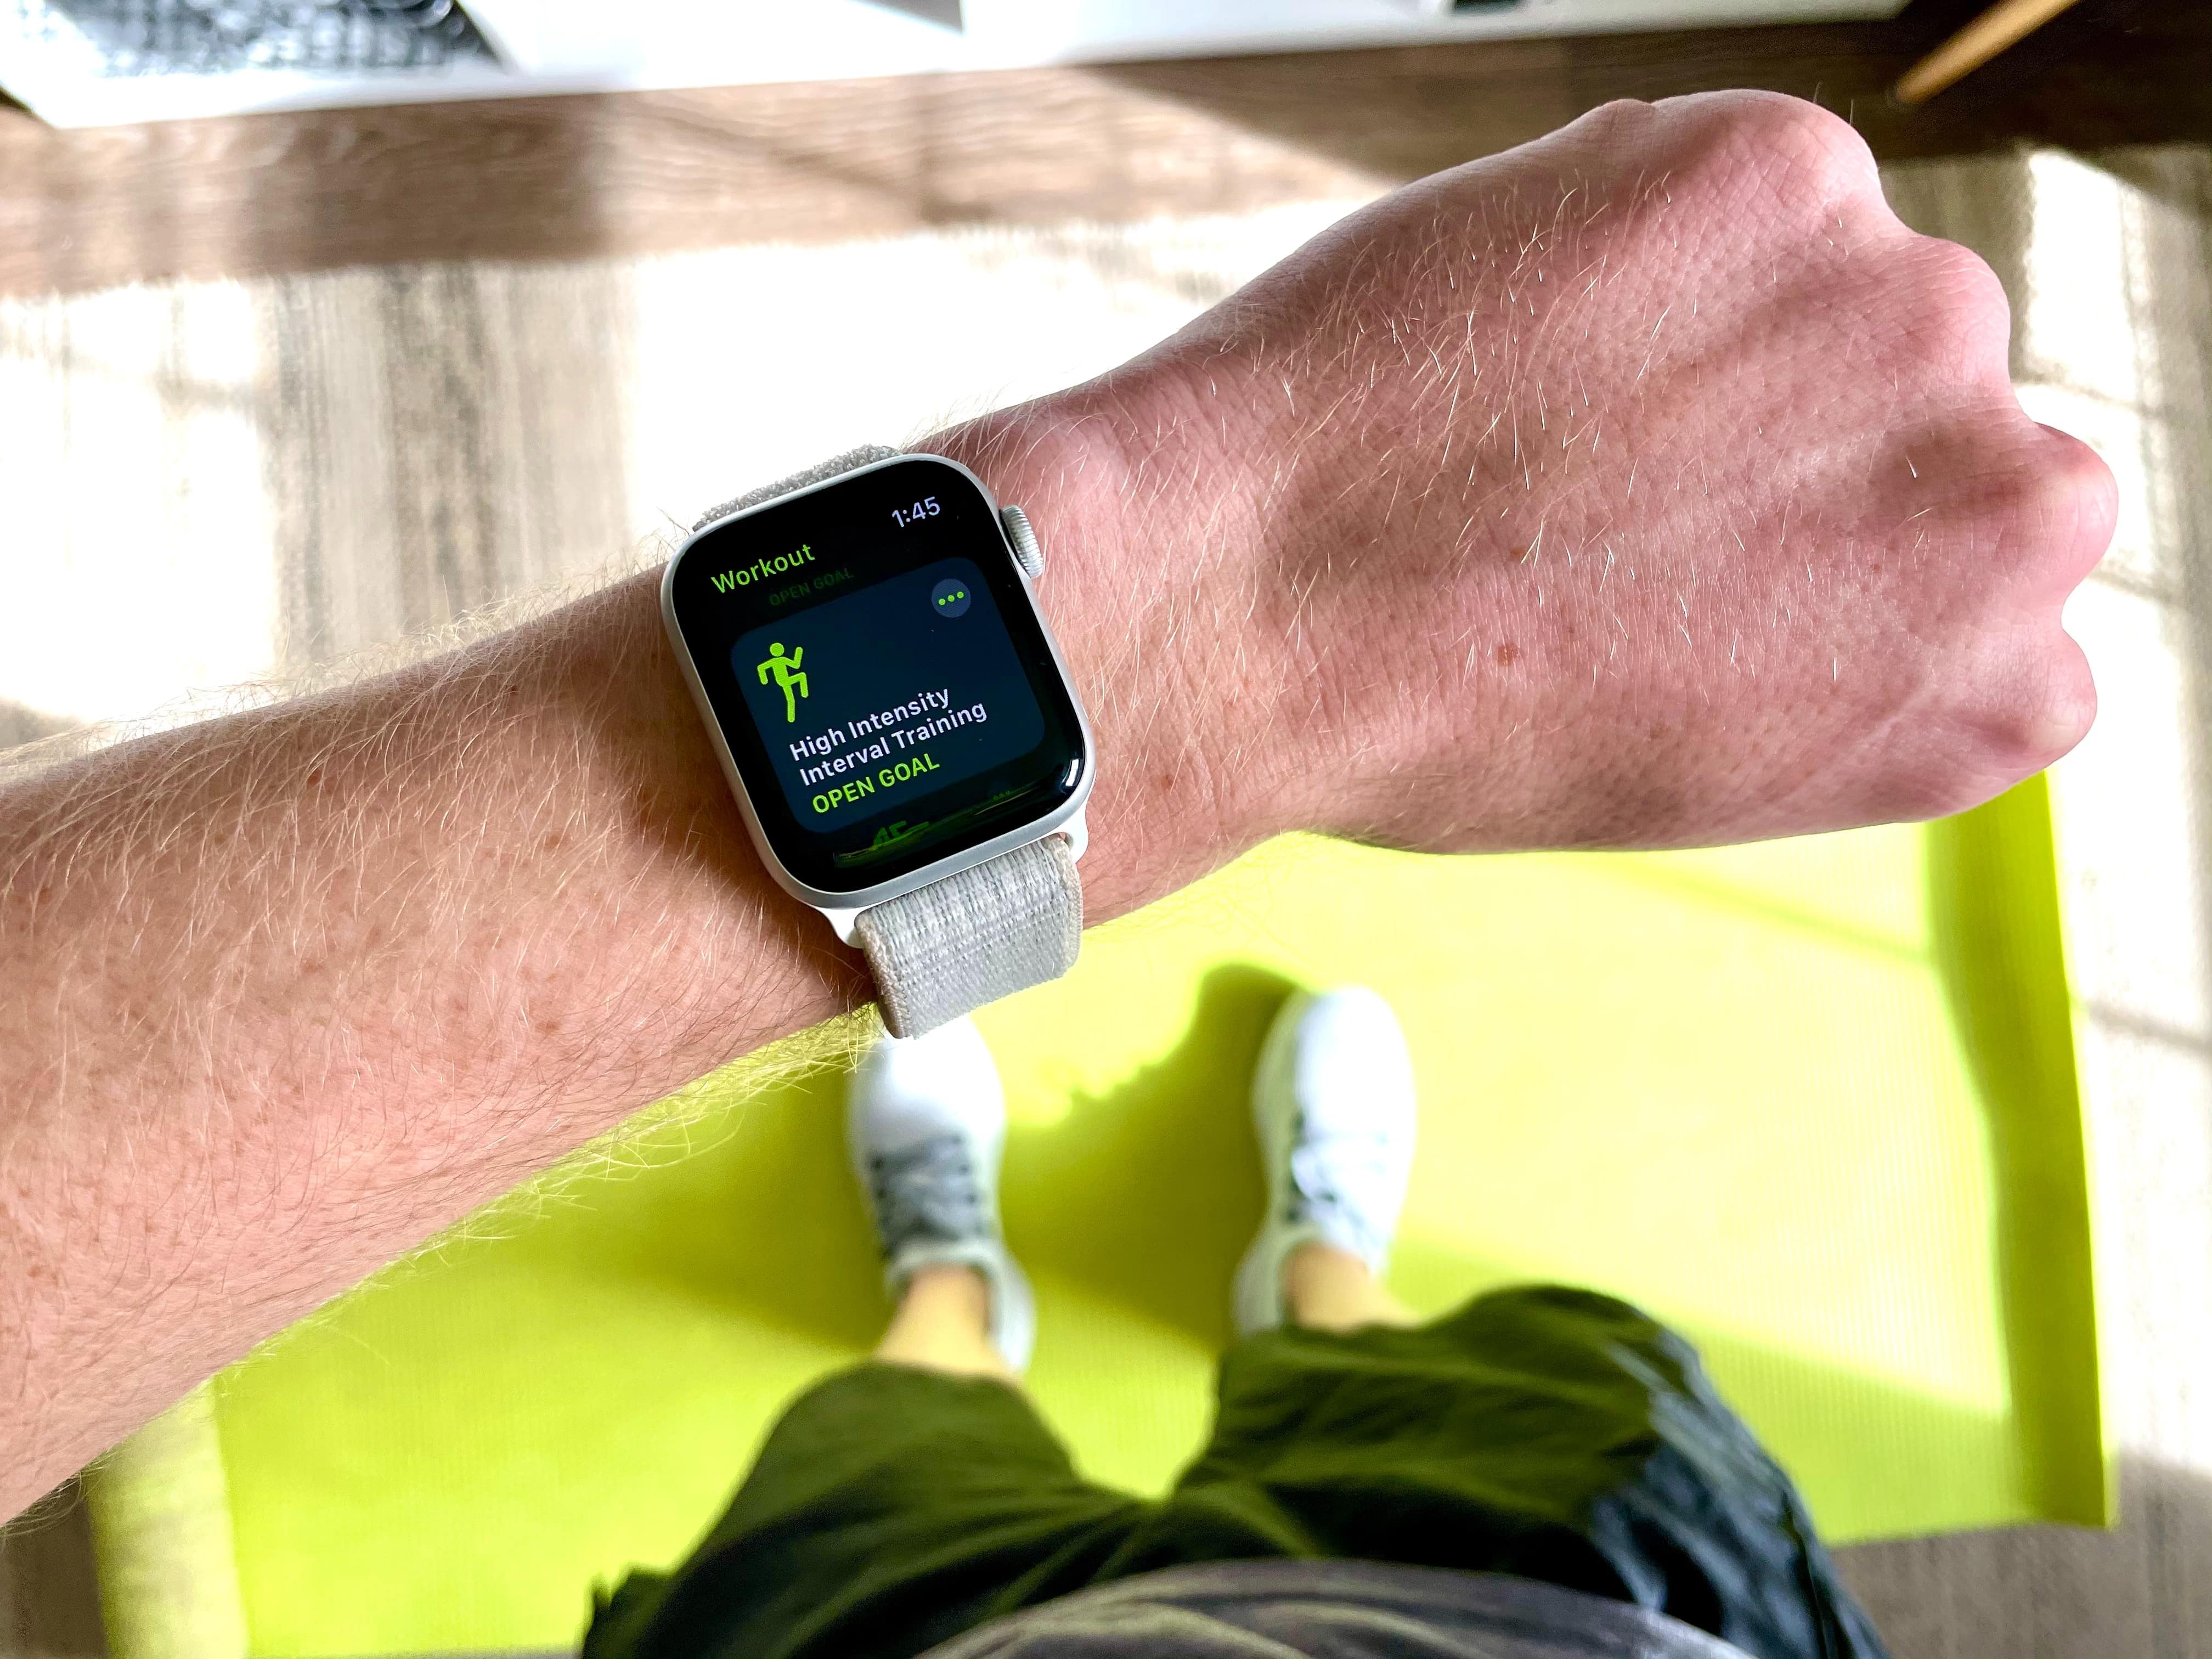 How Will Wearable Tech Improve Your Home Gym Workout?